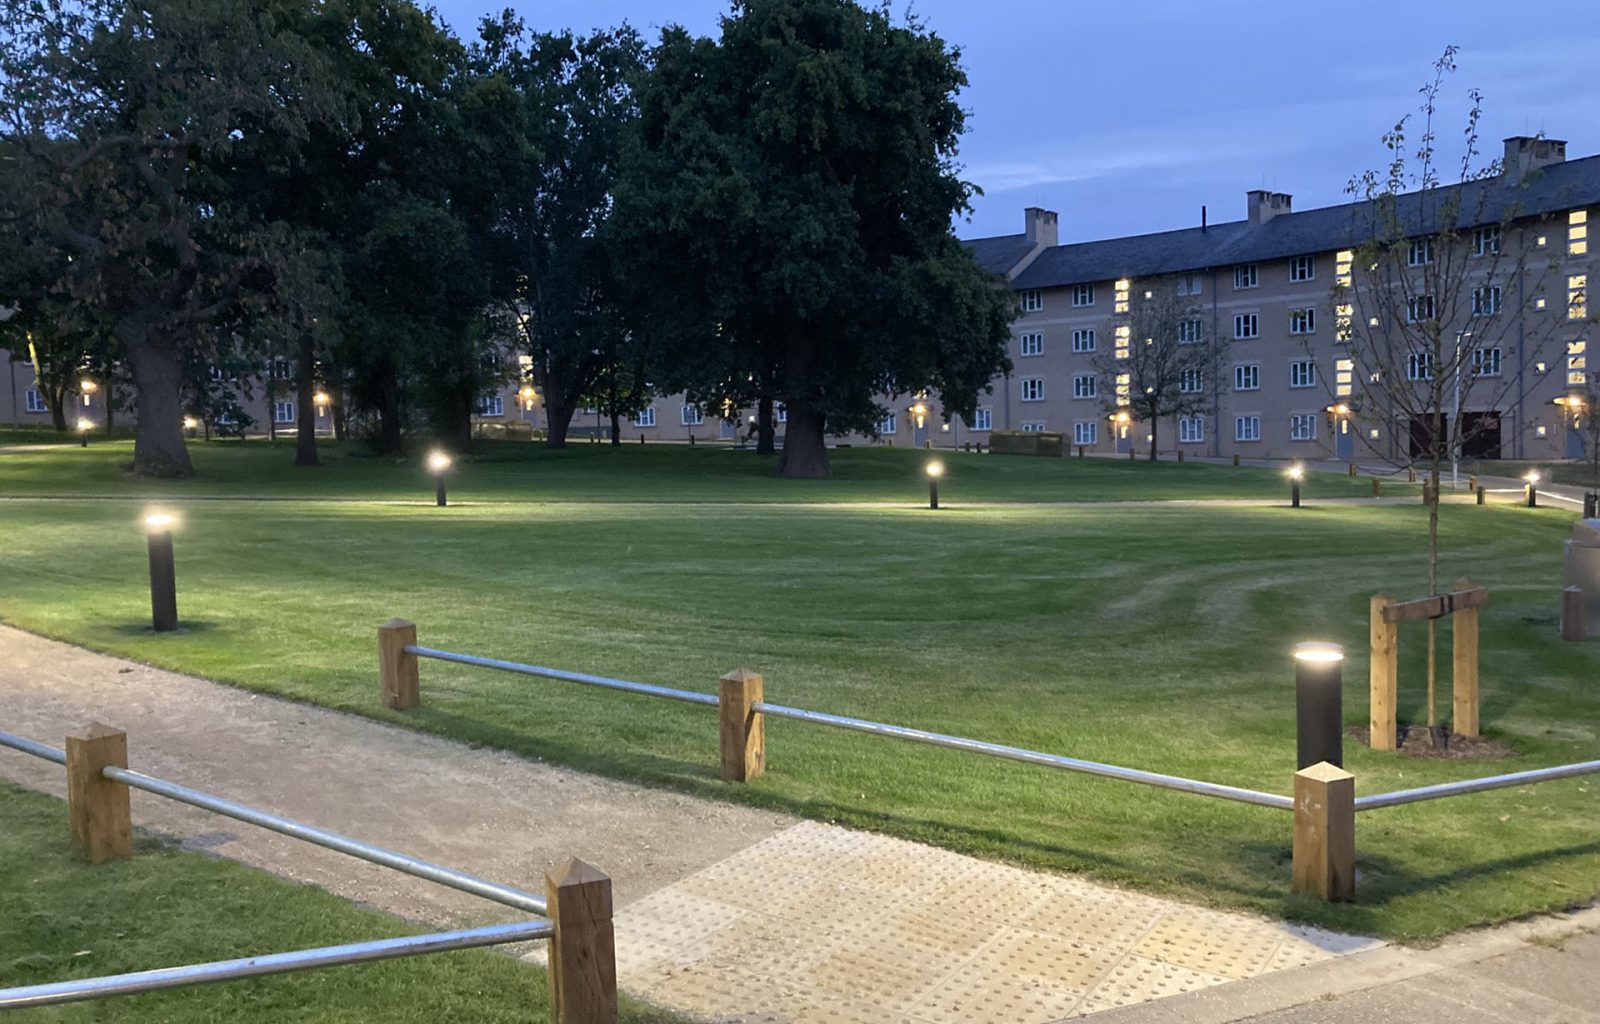 Landscaped area outside student accommodation, which features pathway lighting, mature and young trees, knee-rail fencing and accessibility paving.